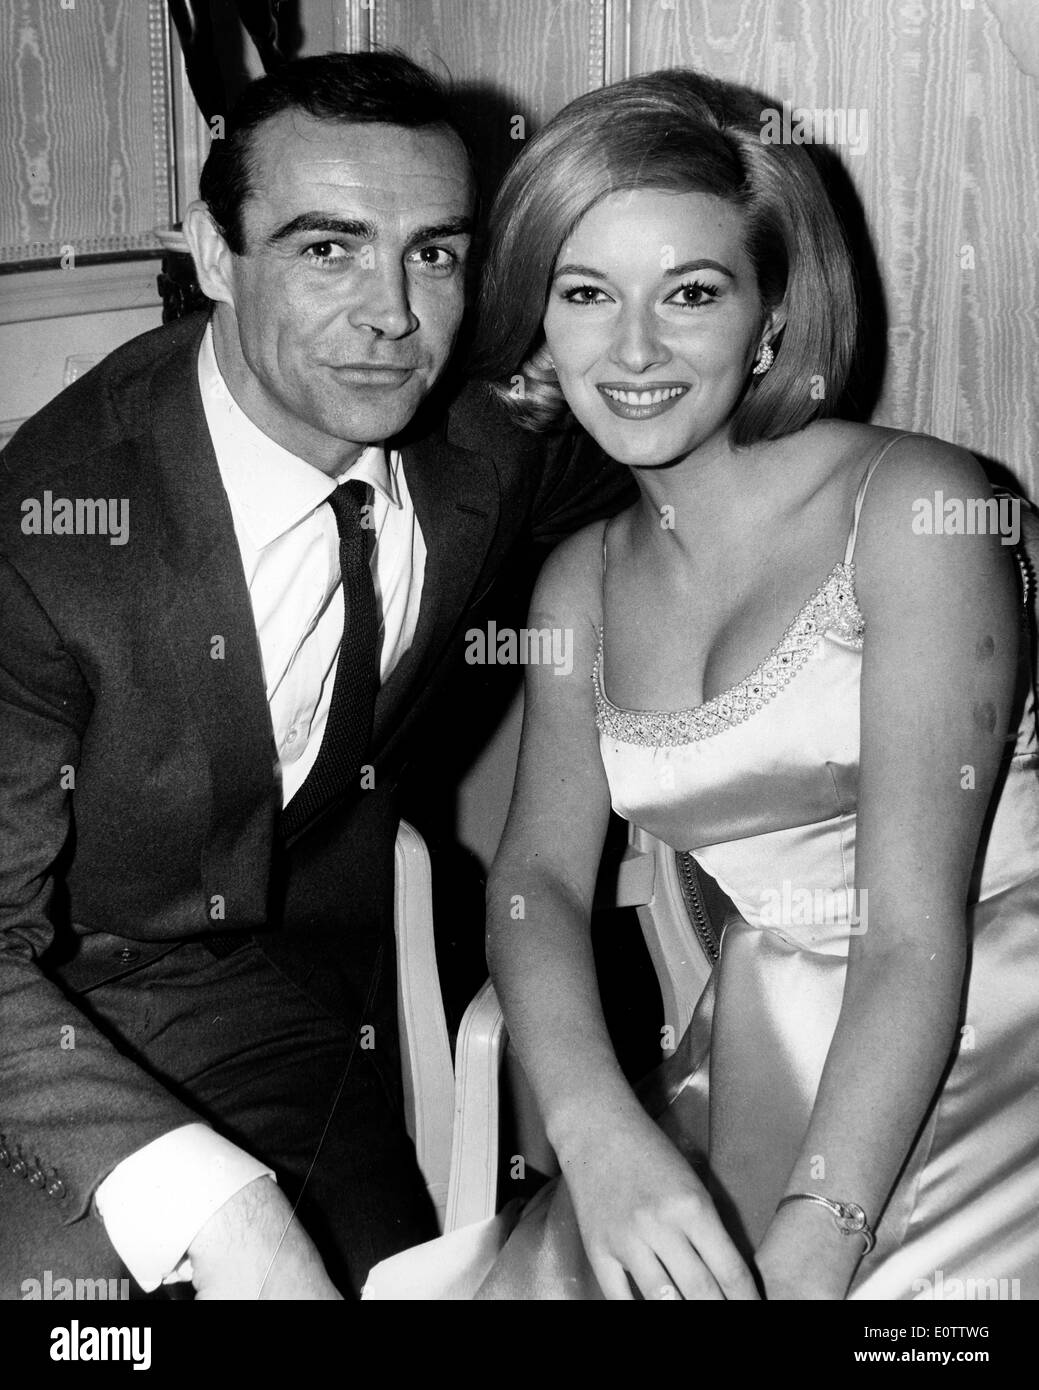 March 3, 1963 - London, England, United Kingdom - SEAN CONNERY meets the new female star of his latest Bond film 'From Russia with Love'. DANIELA BIANCHI, 21, is from Rome and was selected to play Bond's girlfriend after a three month search involving than 200 girls from all over Europe. Connery and Bianchi smile a reception at the Connaught Hotel this evening. (Credit Image: © Keystone Press Agency/ZUMA Press Wire Stock Photo